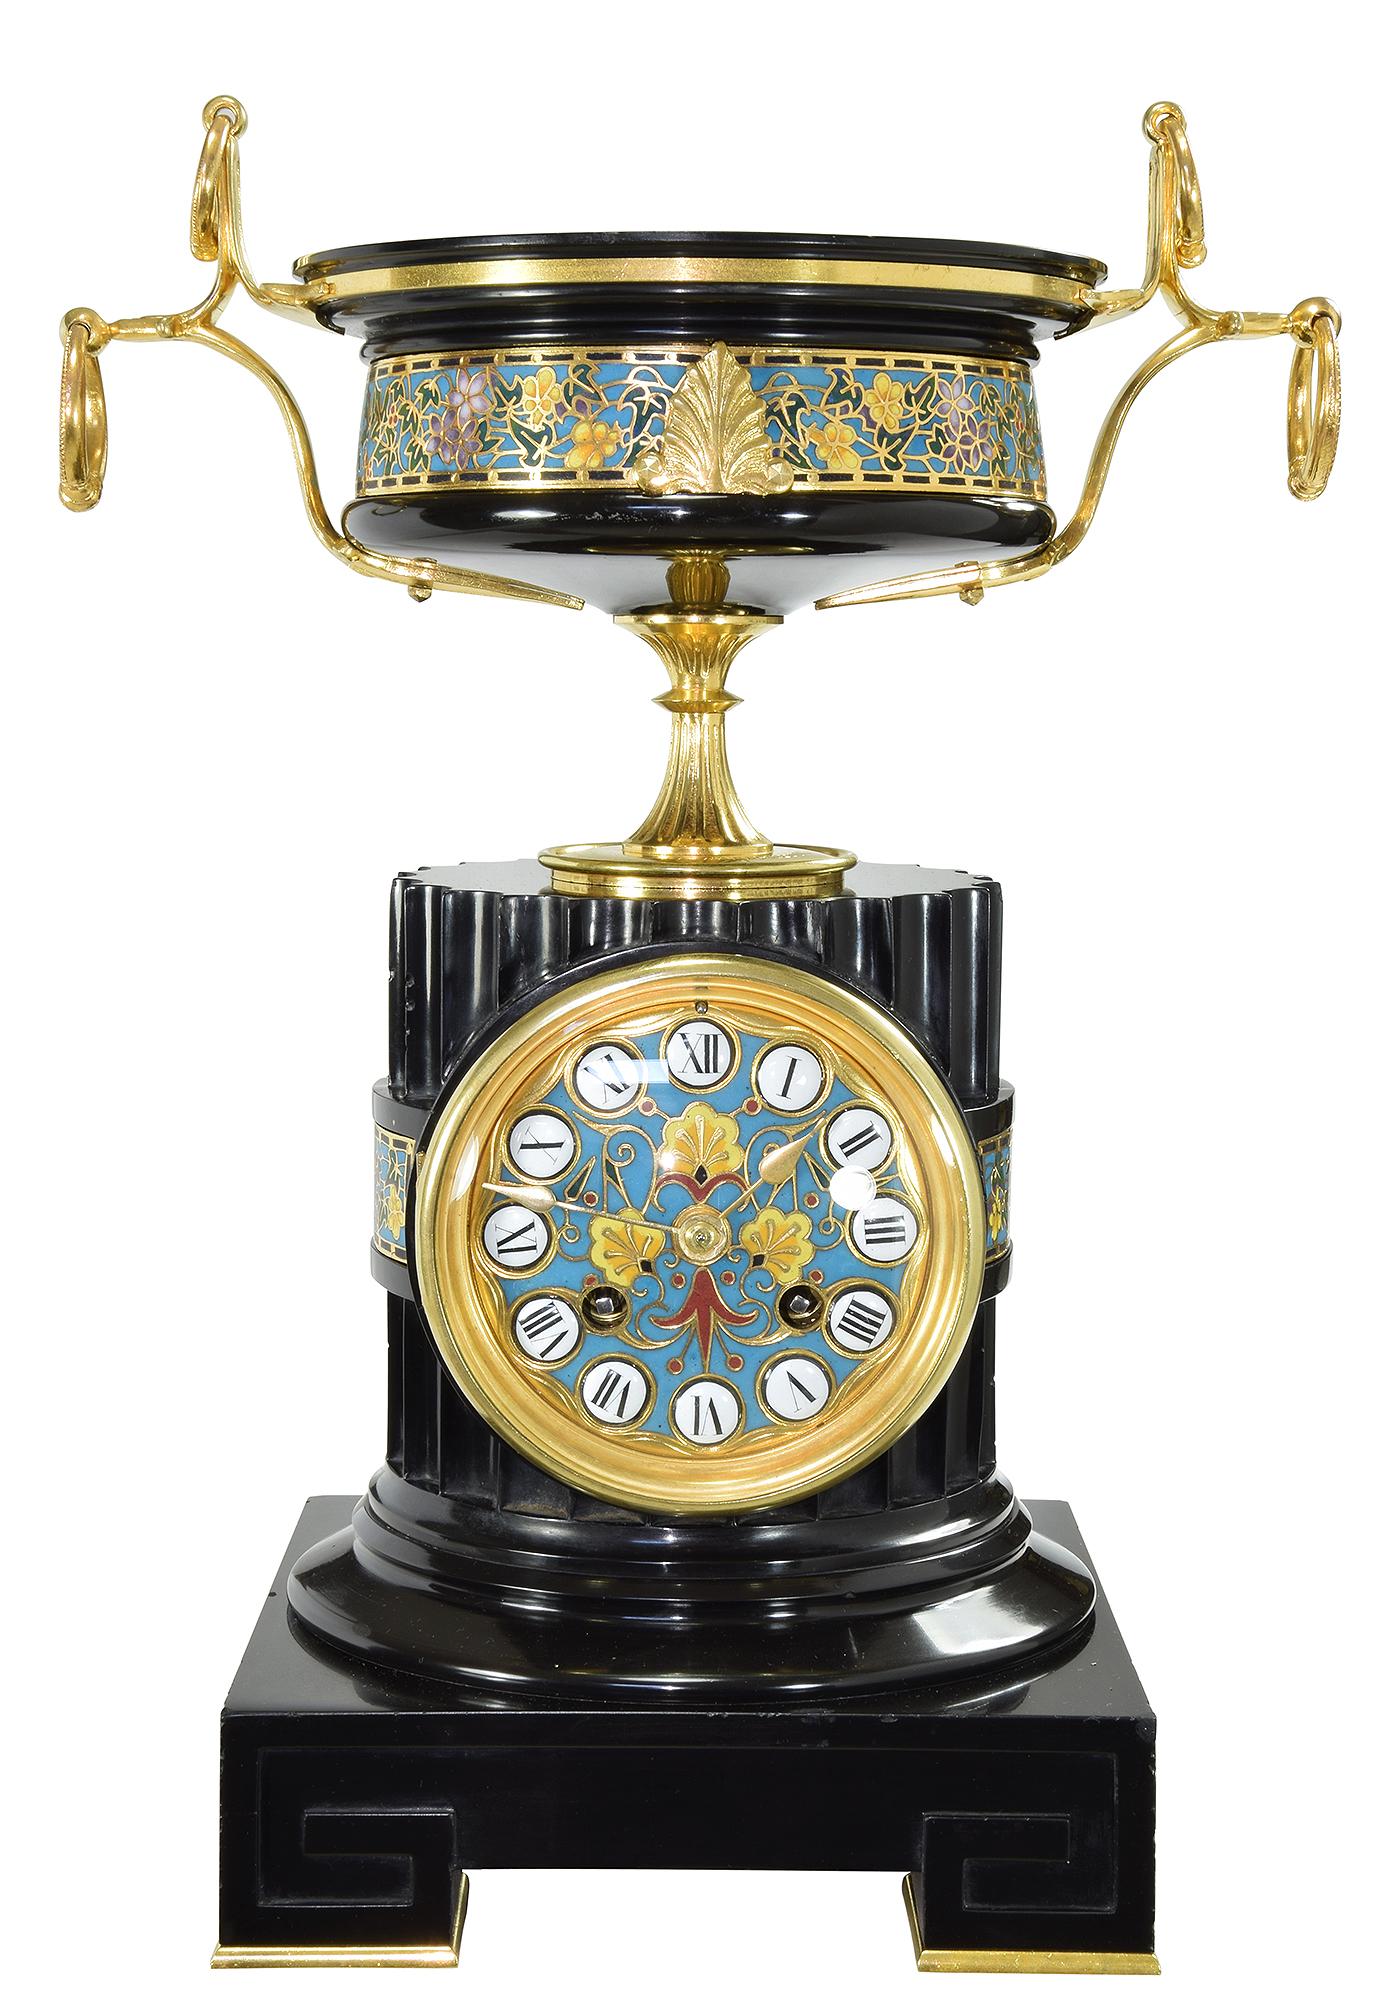 A jewel, a rare clock from the Napoleon III period from the prestigious art bronze foundry factory, signed F.Barbedienne for Ferdinand Barbedienne (1810-1892). Architecture in black marble forming a fluted column set with a cloisonné bronze plate